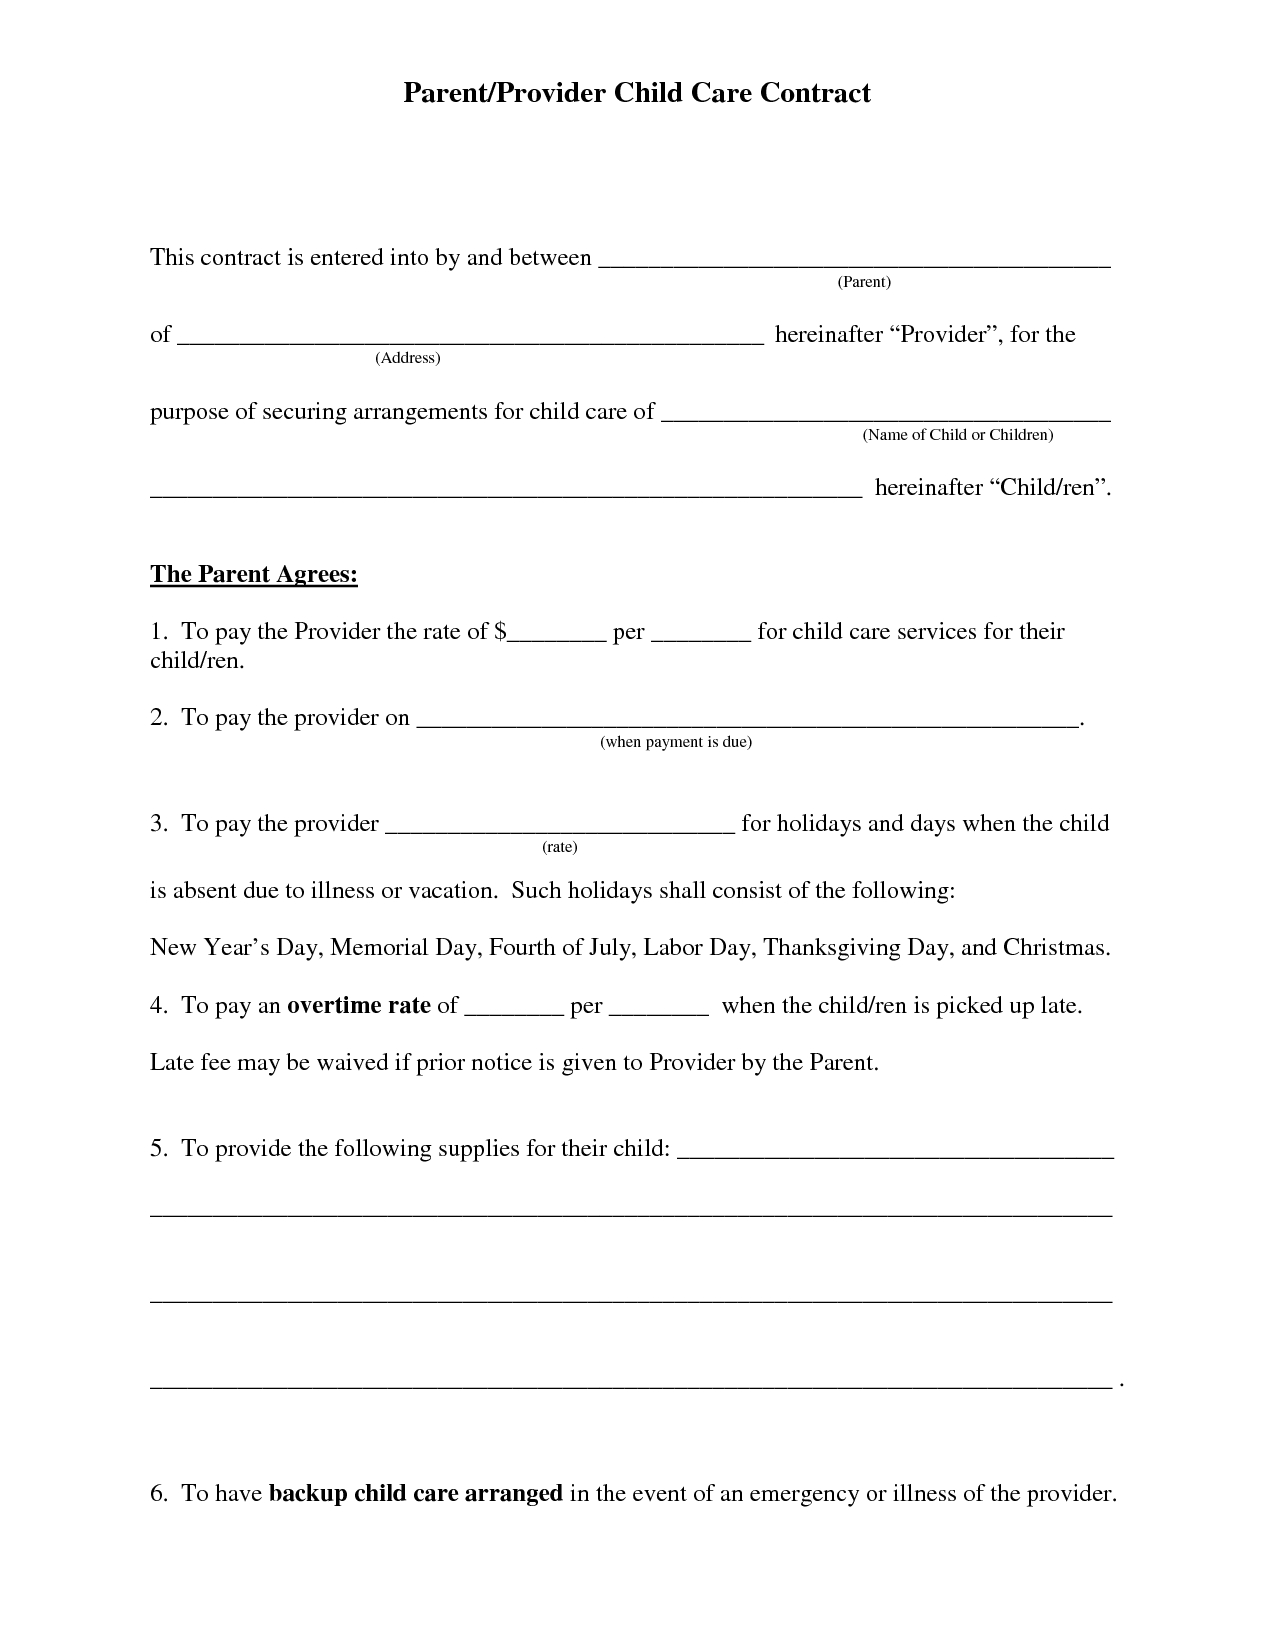 Free Daycare Contract Forms | Daycare Forms | Daycare Contract - Free Printable Contracts